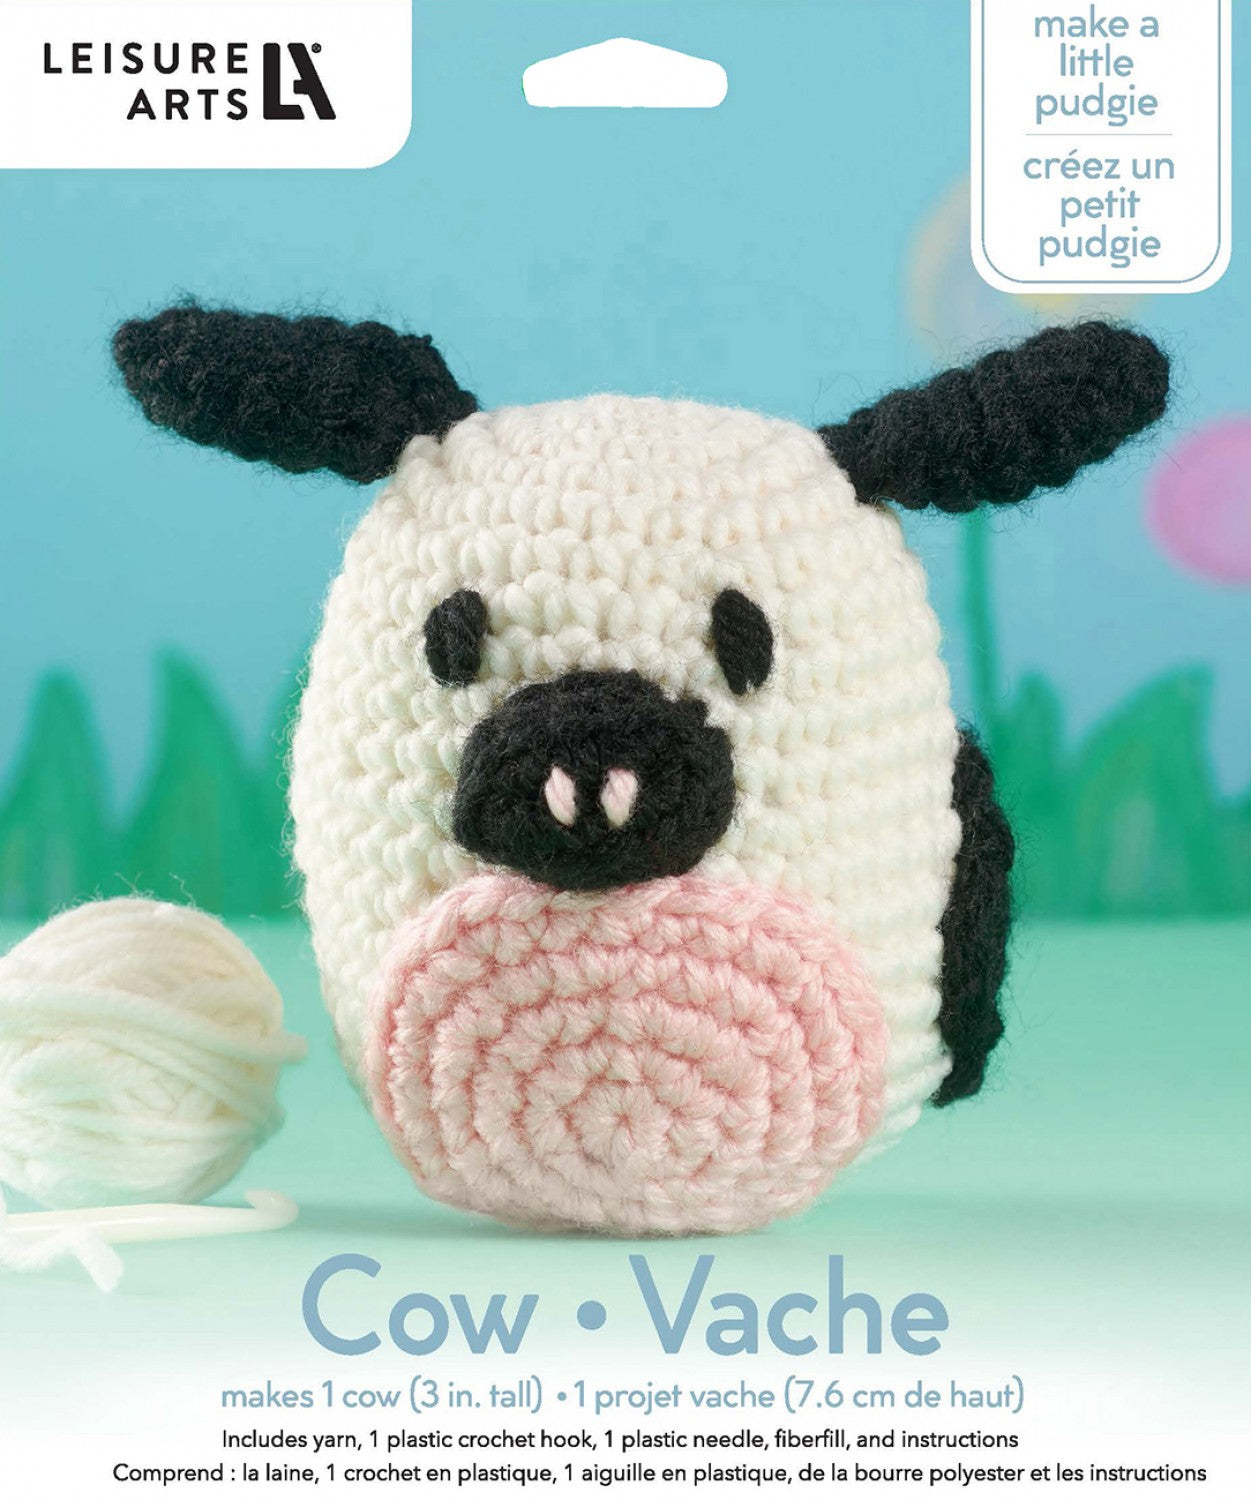 Crochet Kit Cat – The Quilted Cow